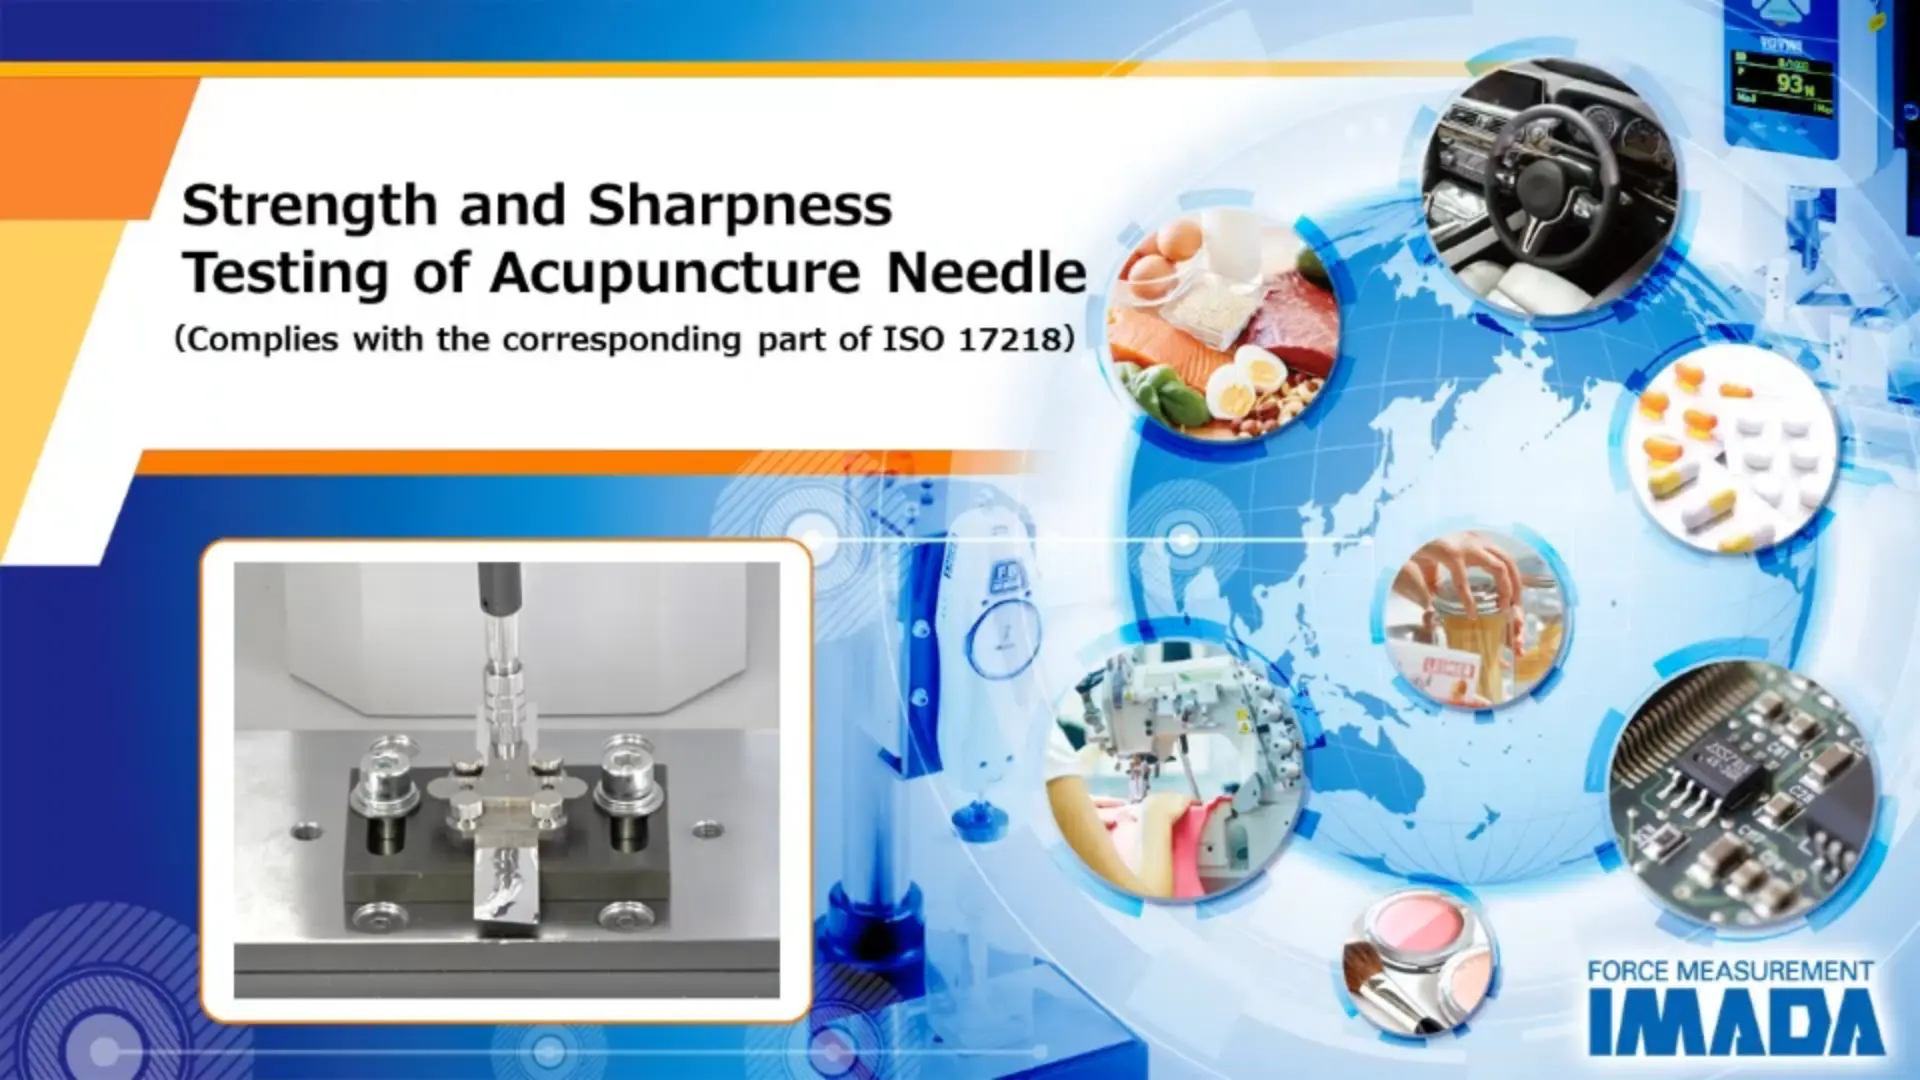 Strength and Sharpness Testing of Acupuncture Needle (Complies with the corresponding part of ISO 17218: 2014)